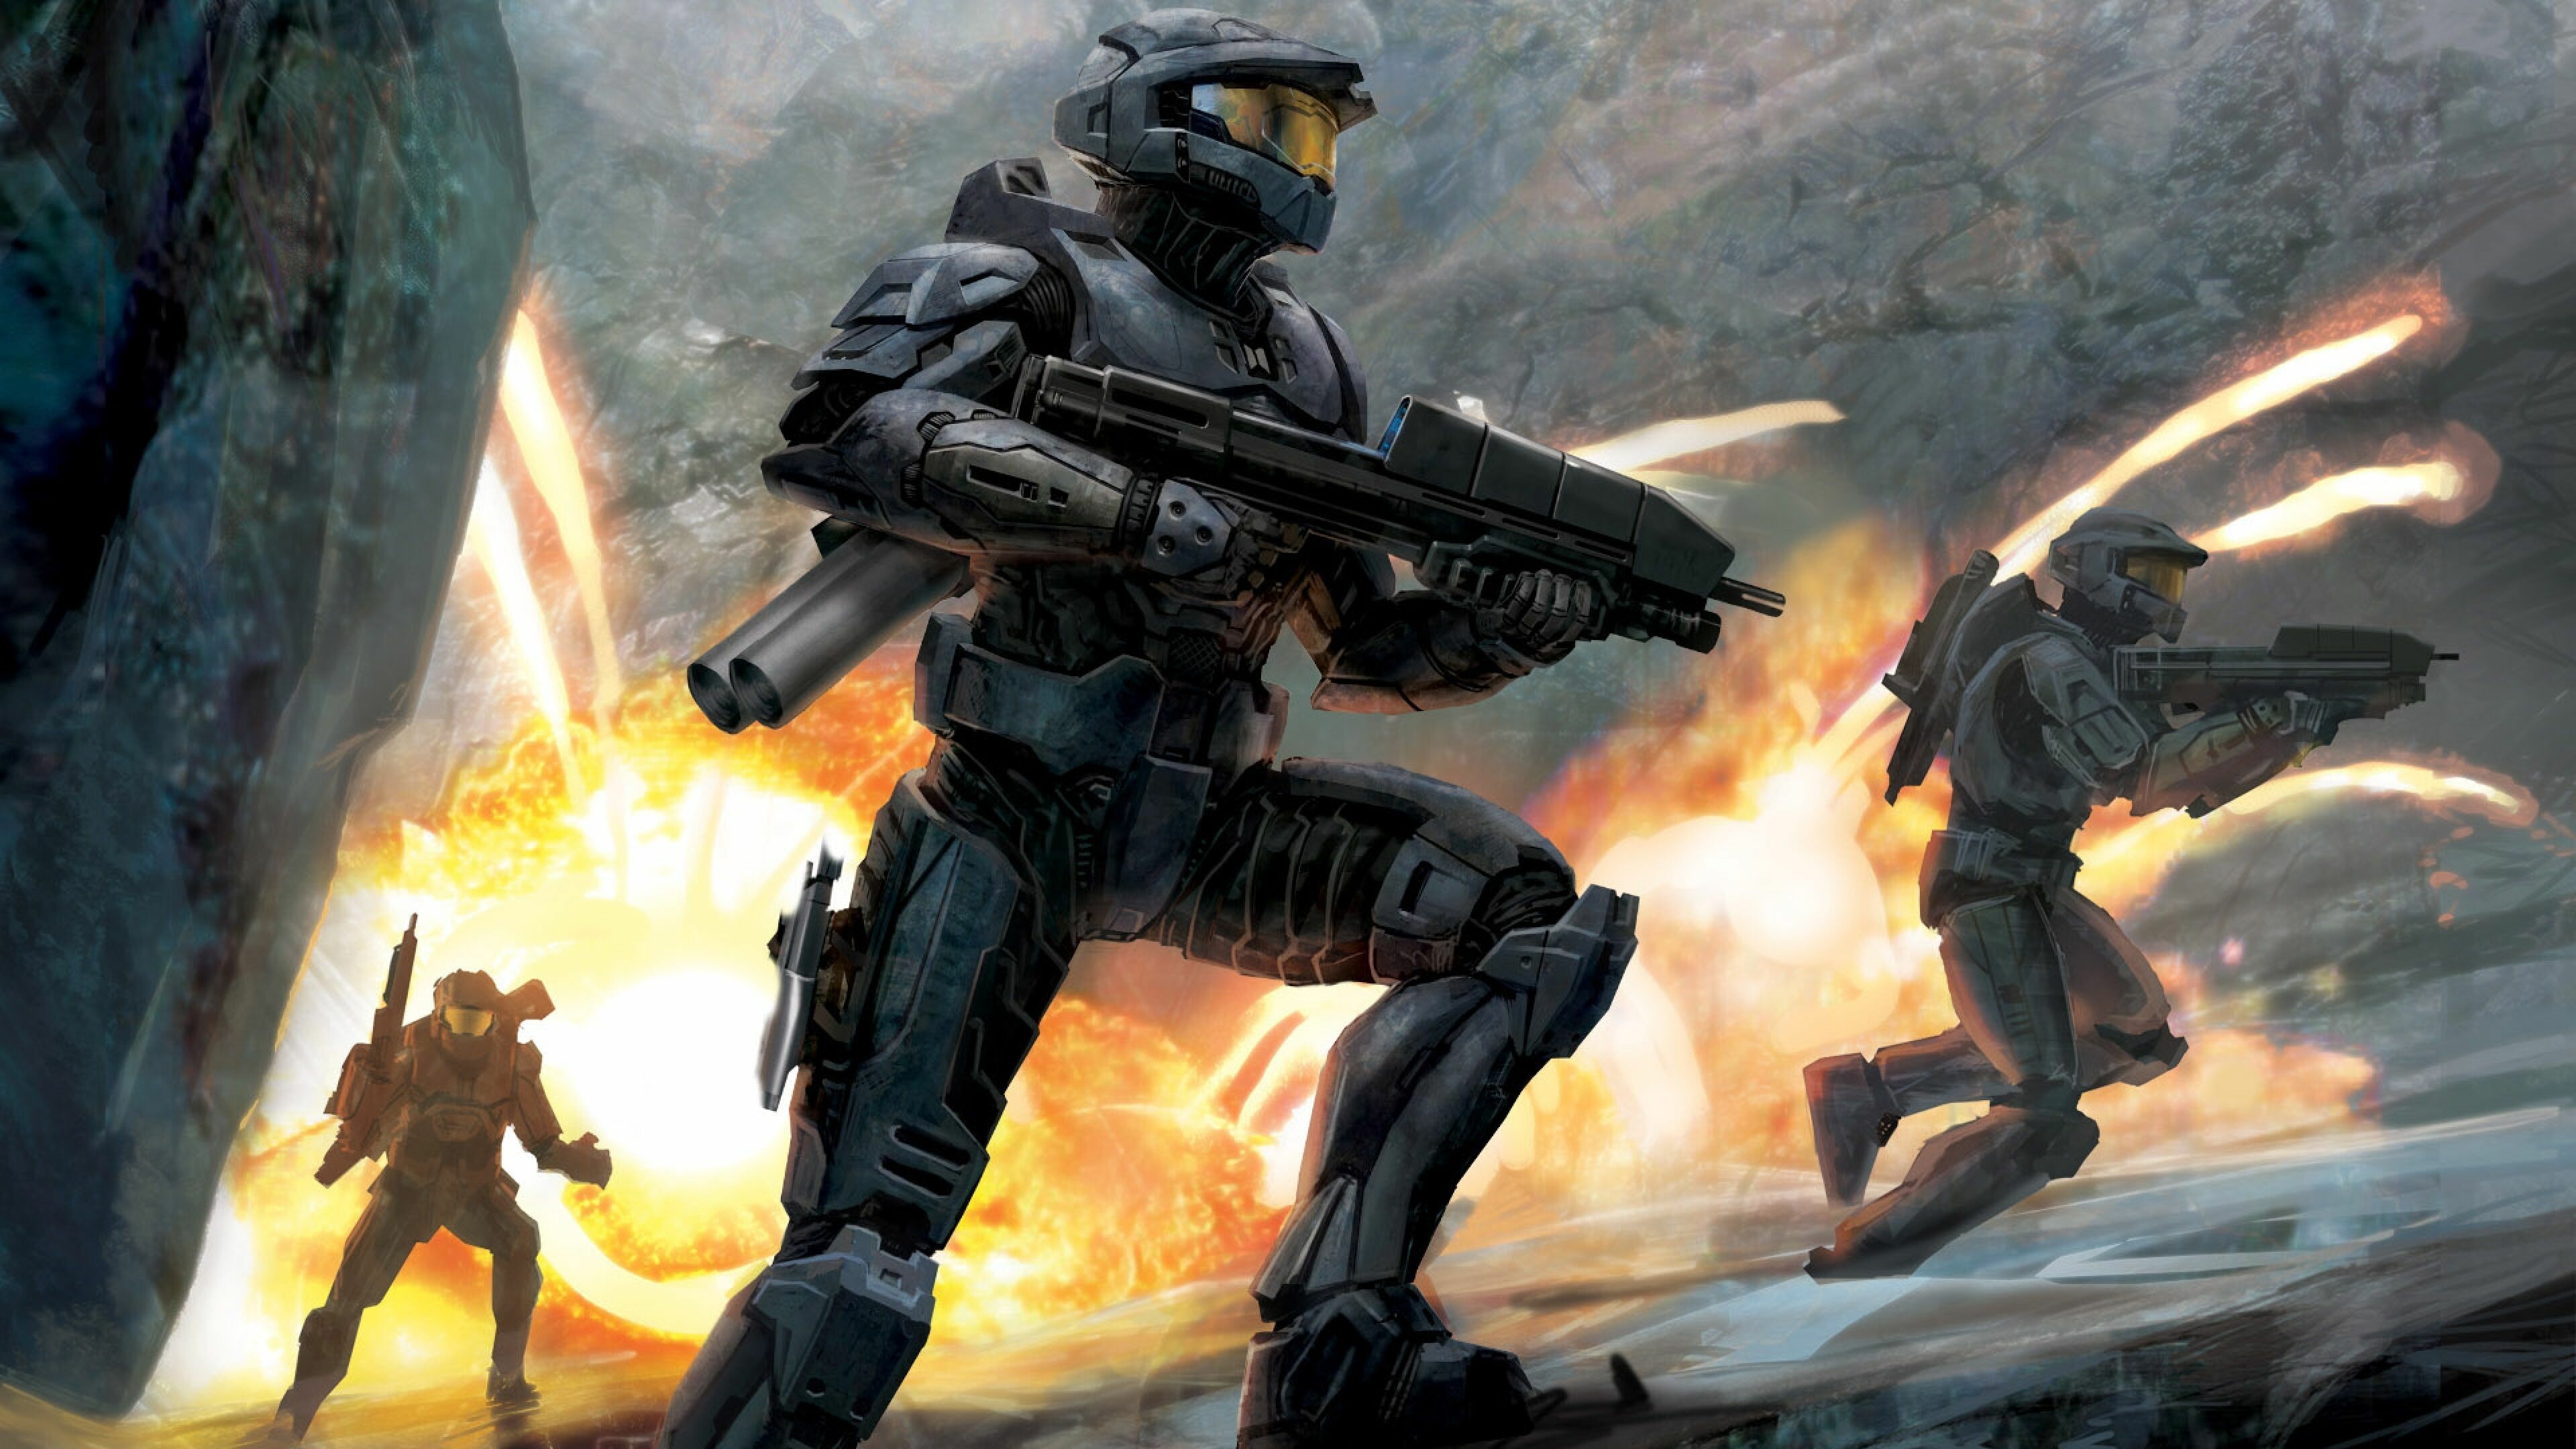 Halo: The franchise has been highly successful commercially and critically, Shooter game. 3840x2160 4K Wallpaper.